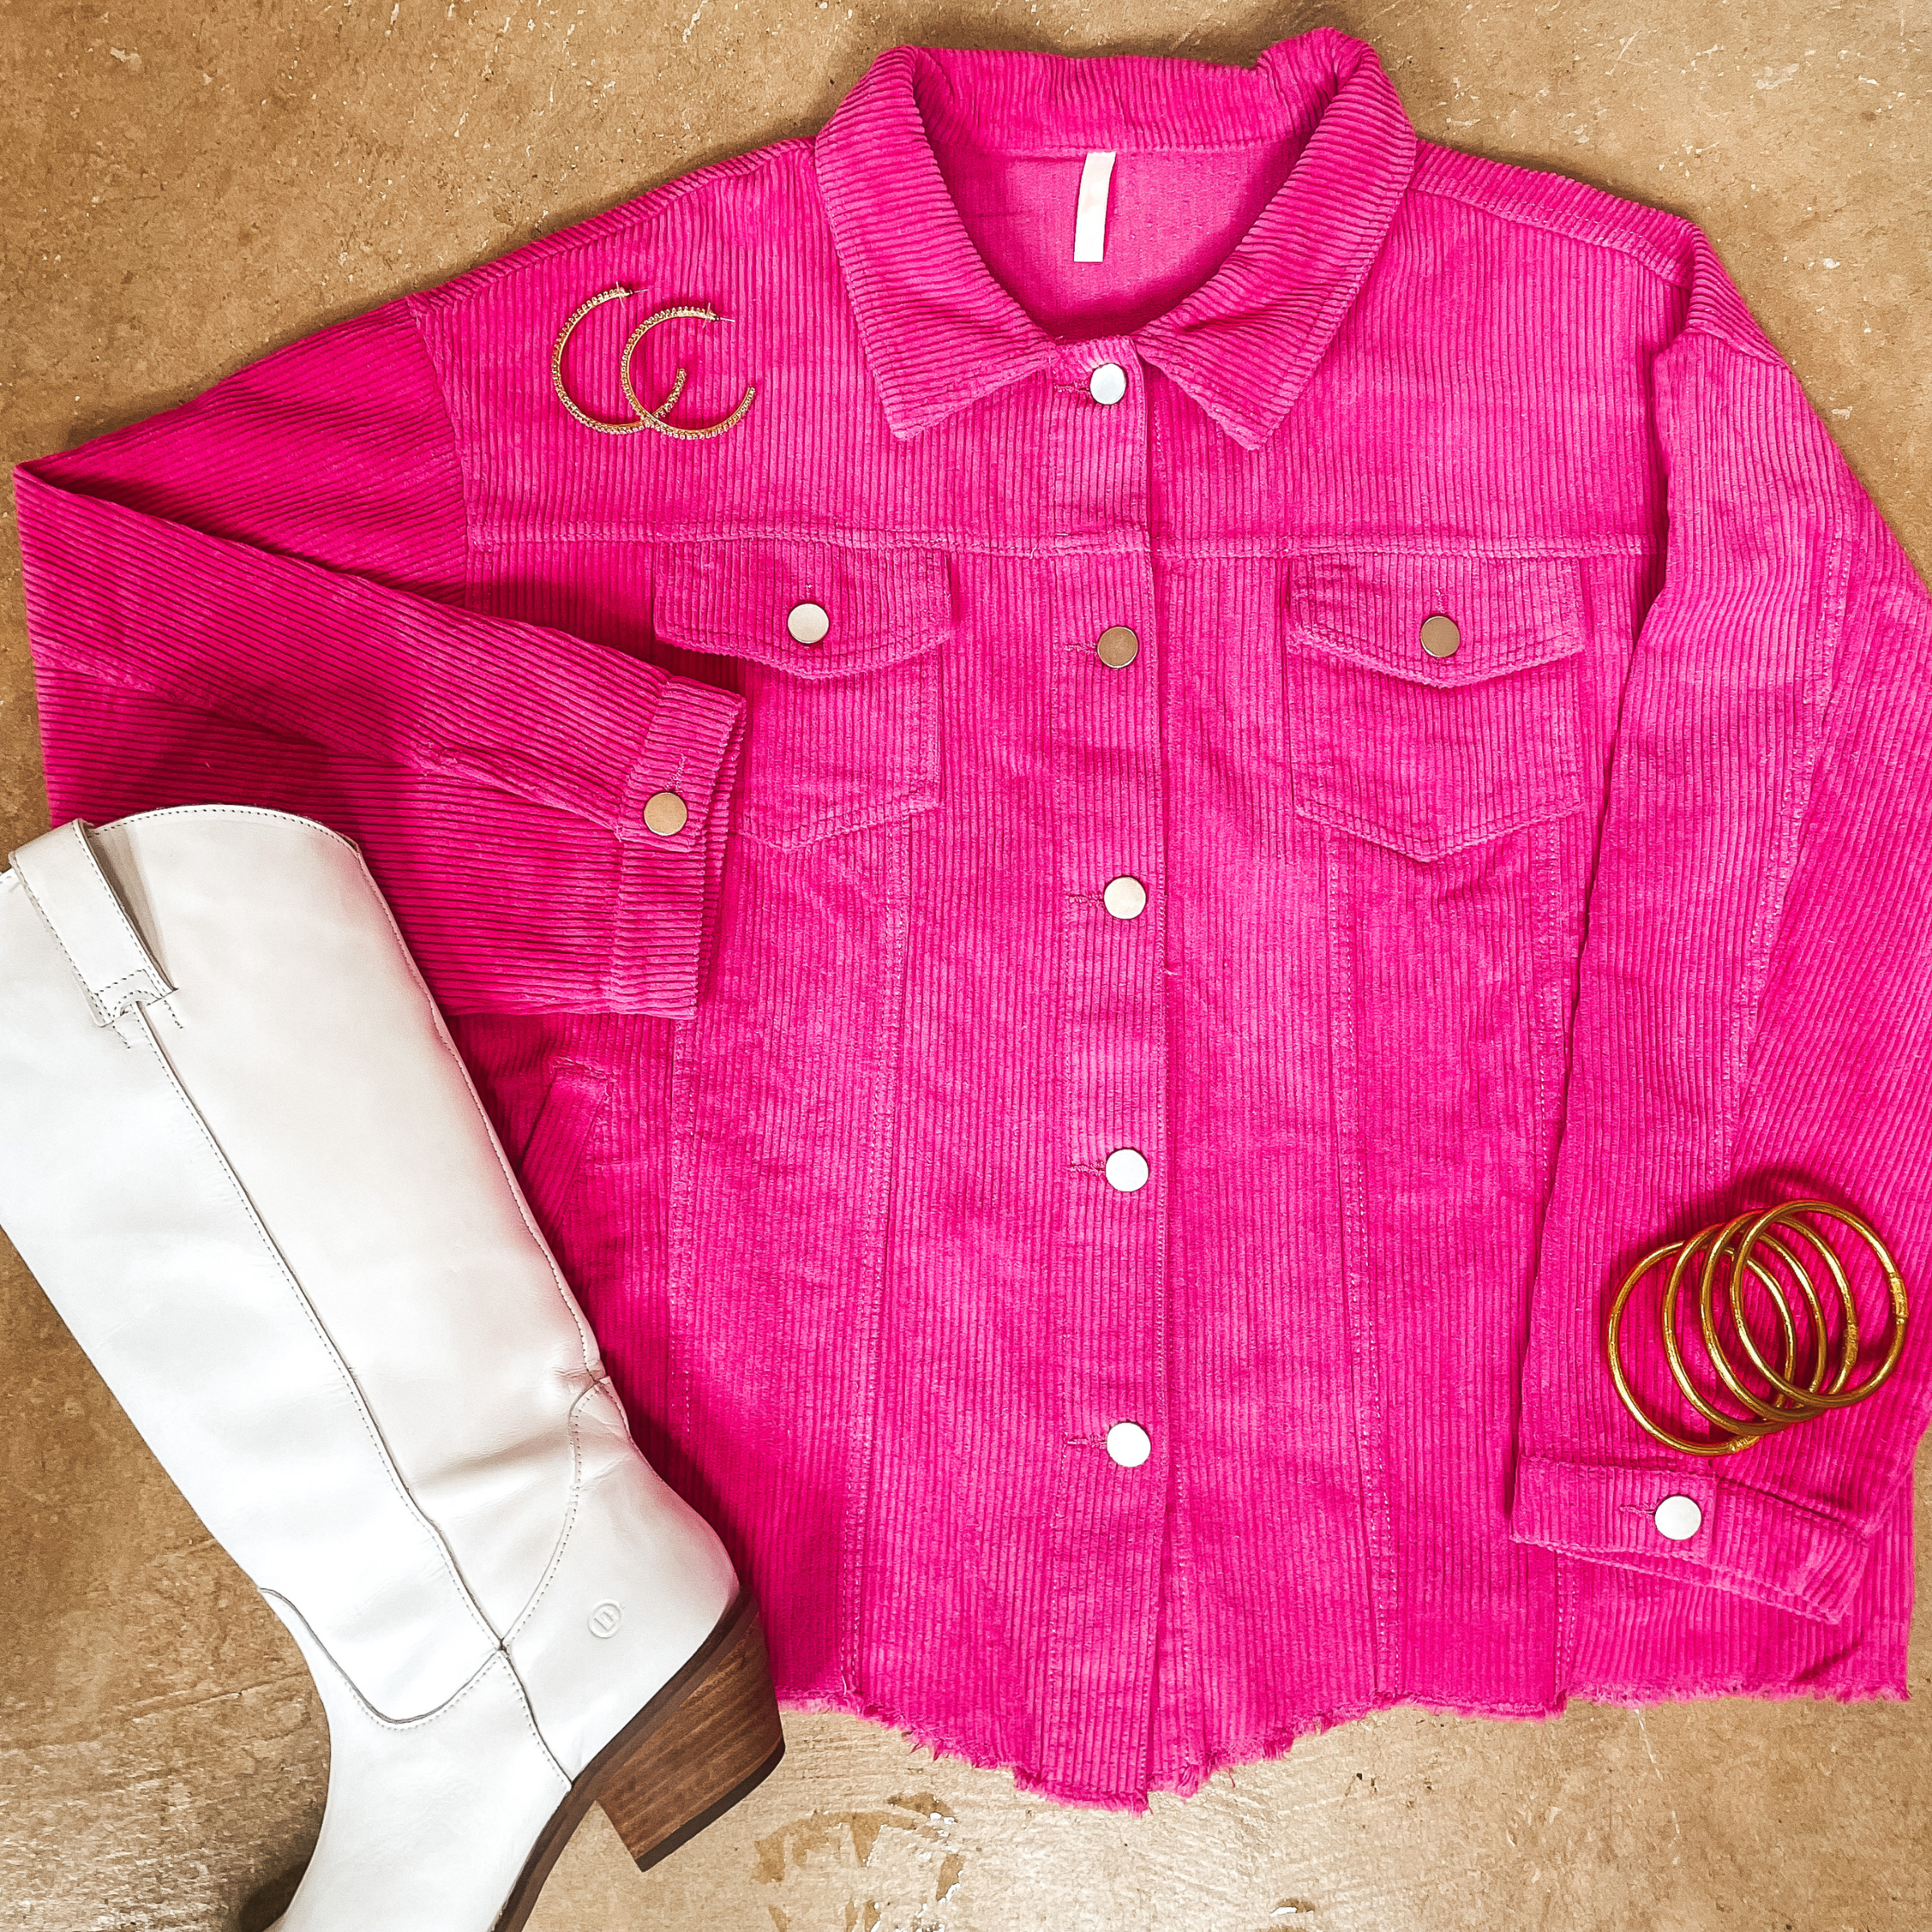 A hot pink corduroy shacket pictured on a concrete background with white boots and gold jewelry.